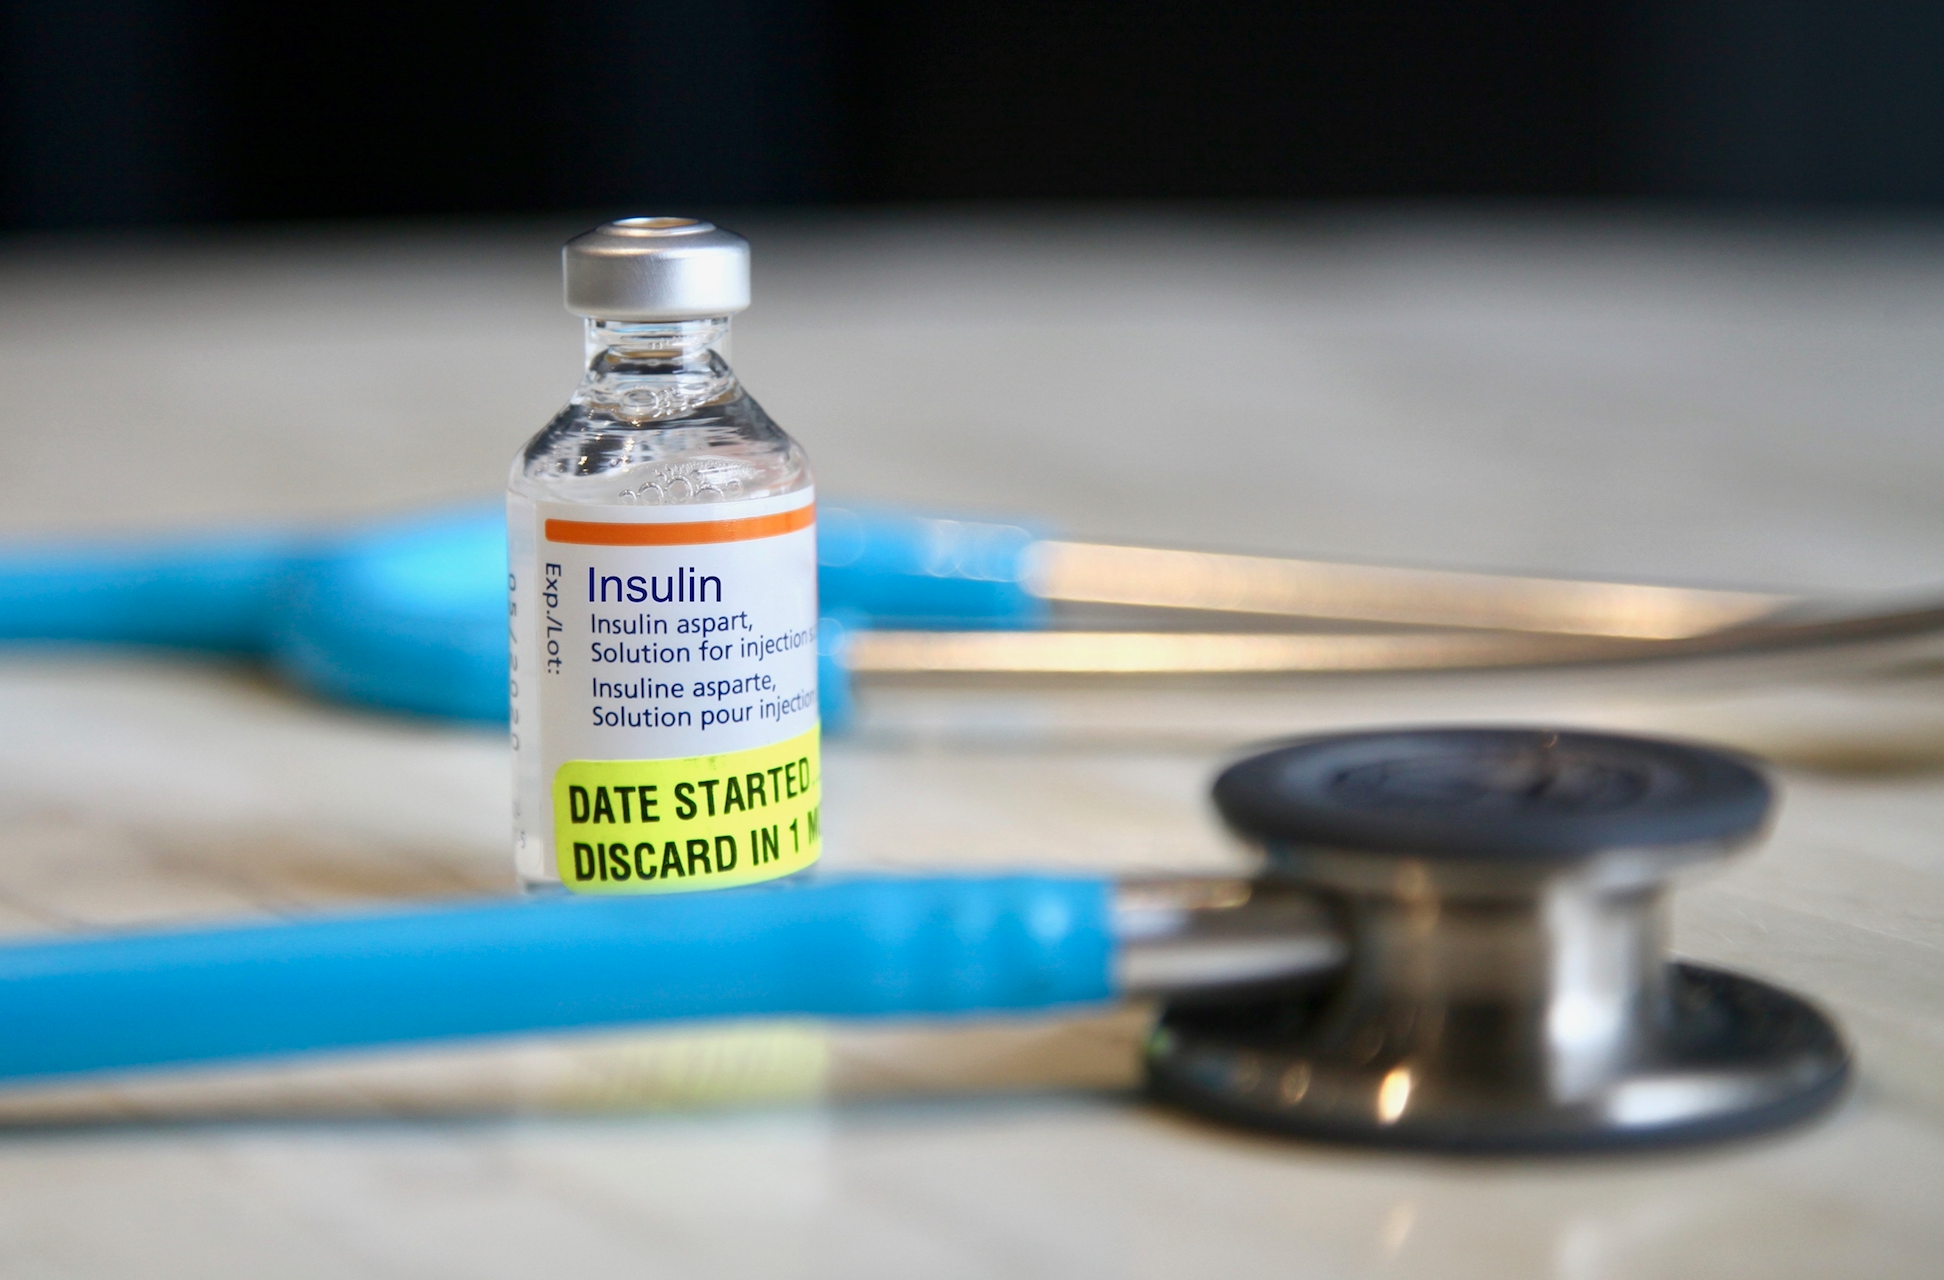 A bottle of insulin surrounded by a stethescope